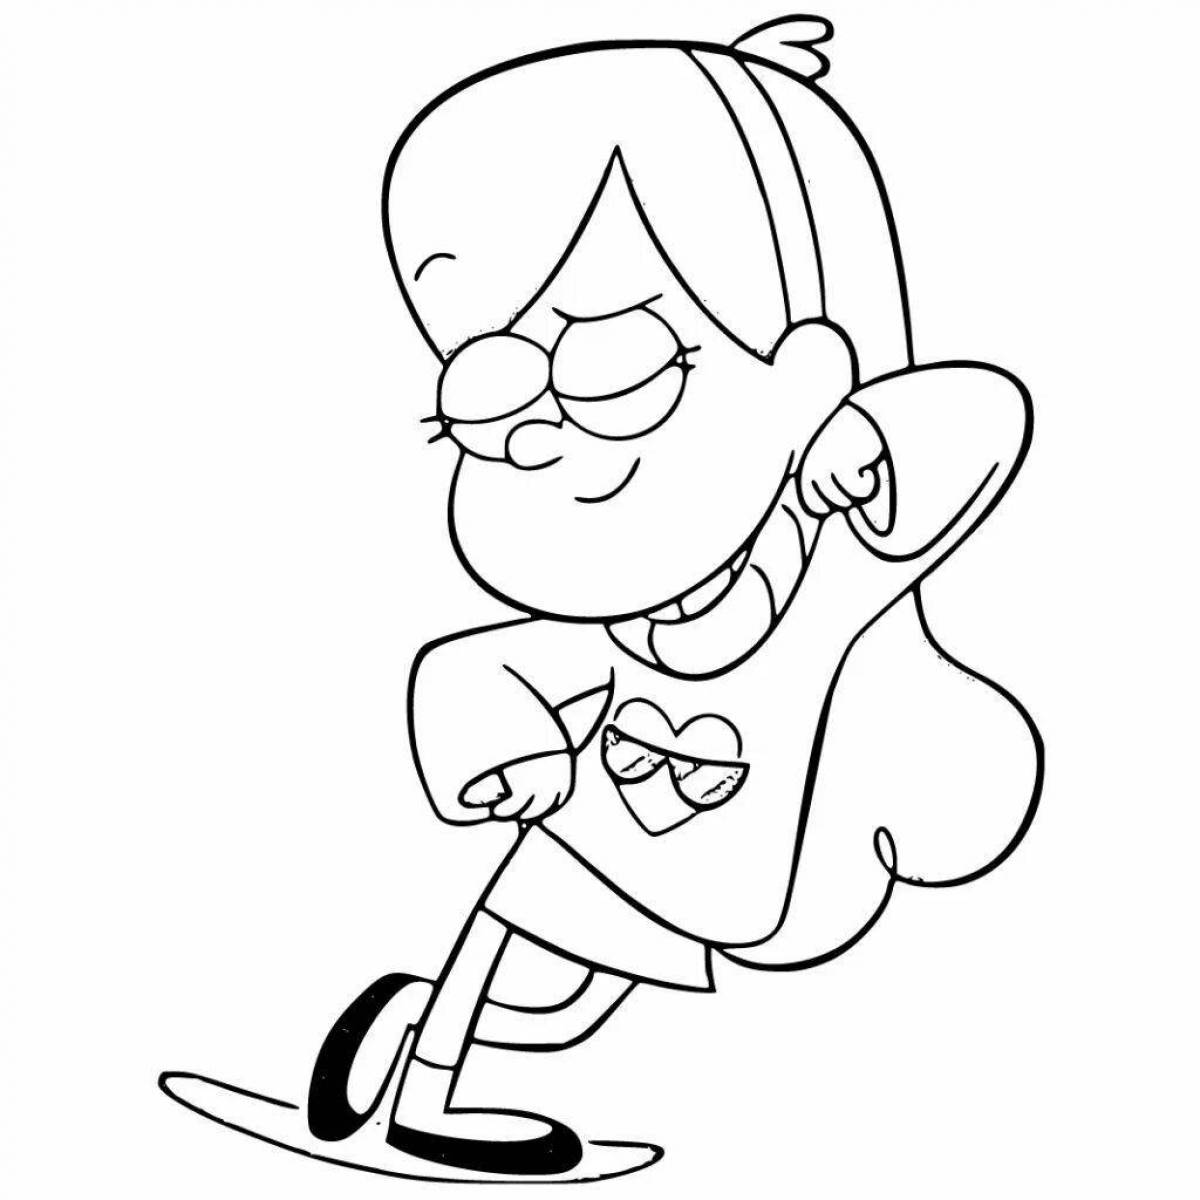 Happy dipper pines coloring page